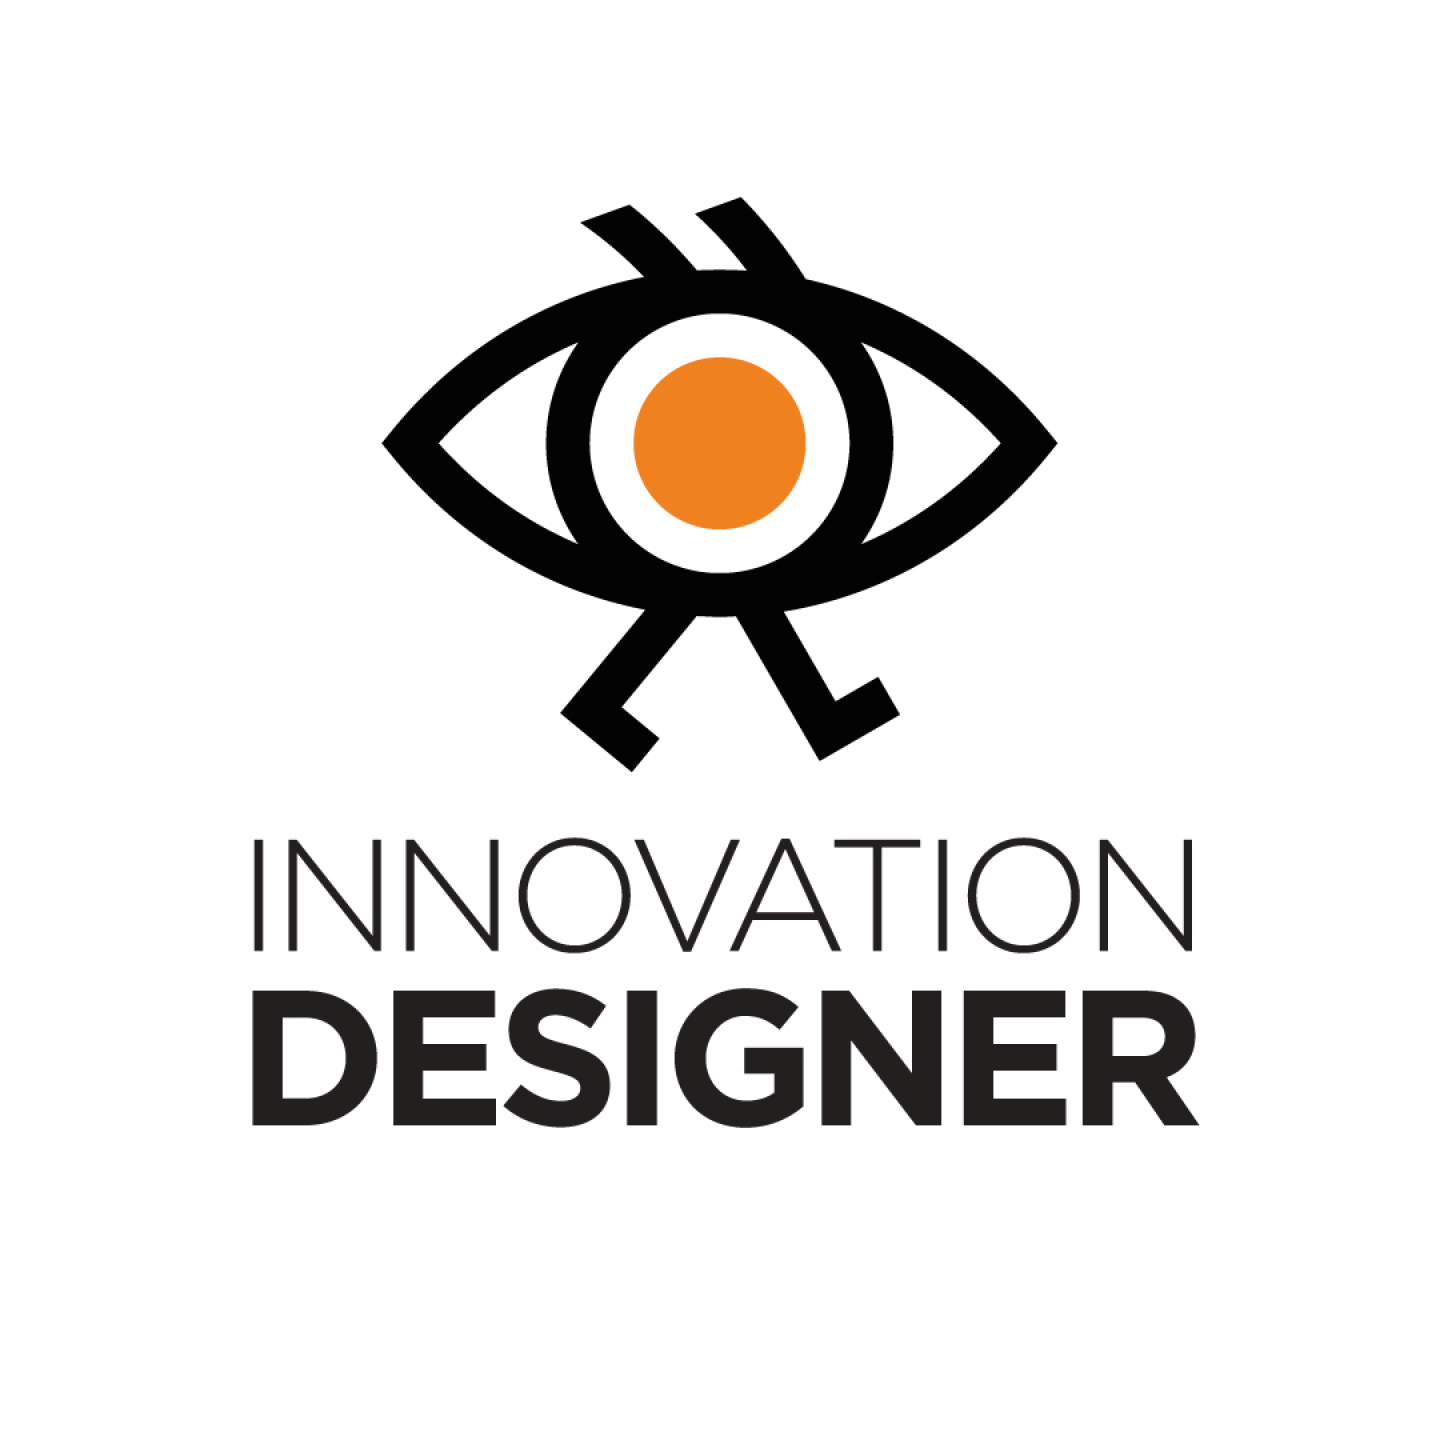 We are looking for NEW INNOVATION DESIGNER